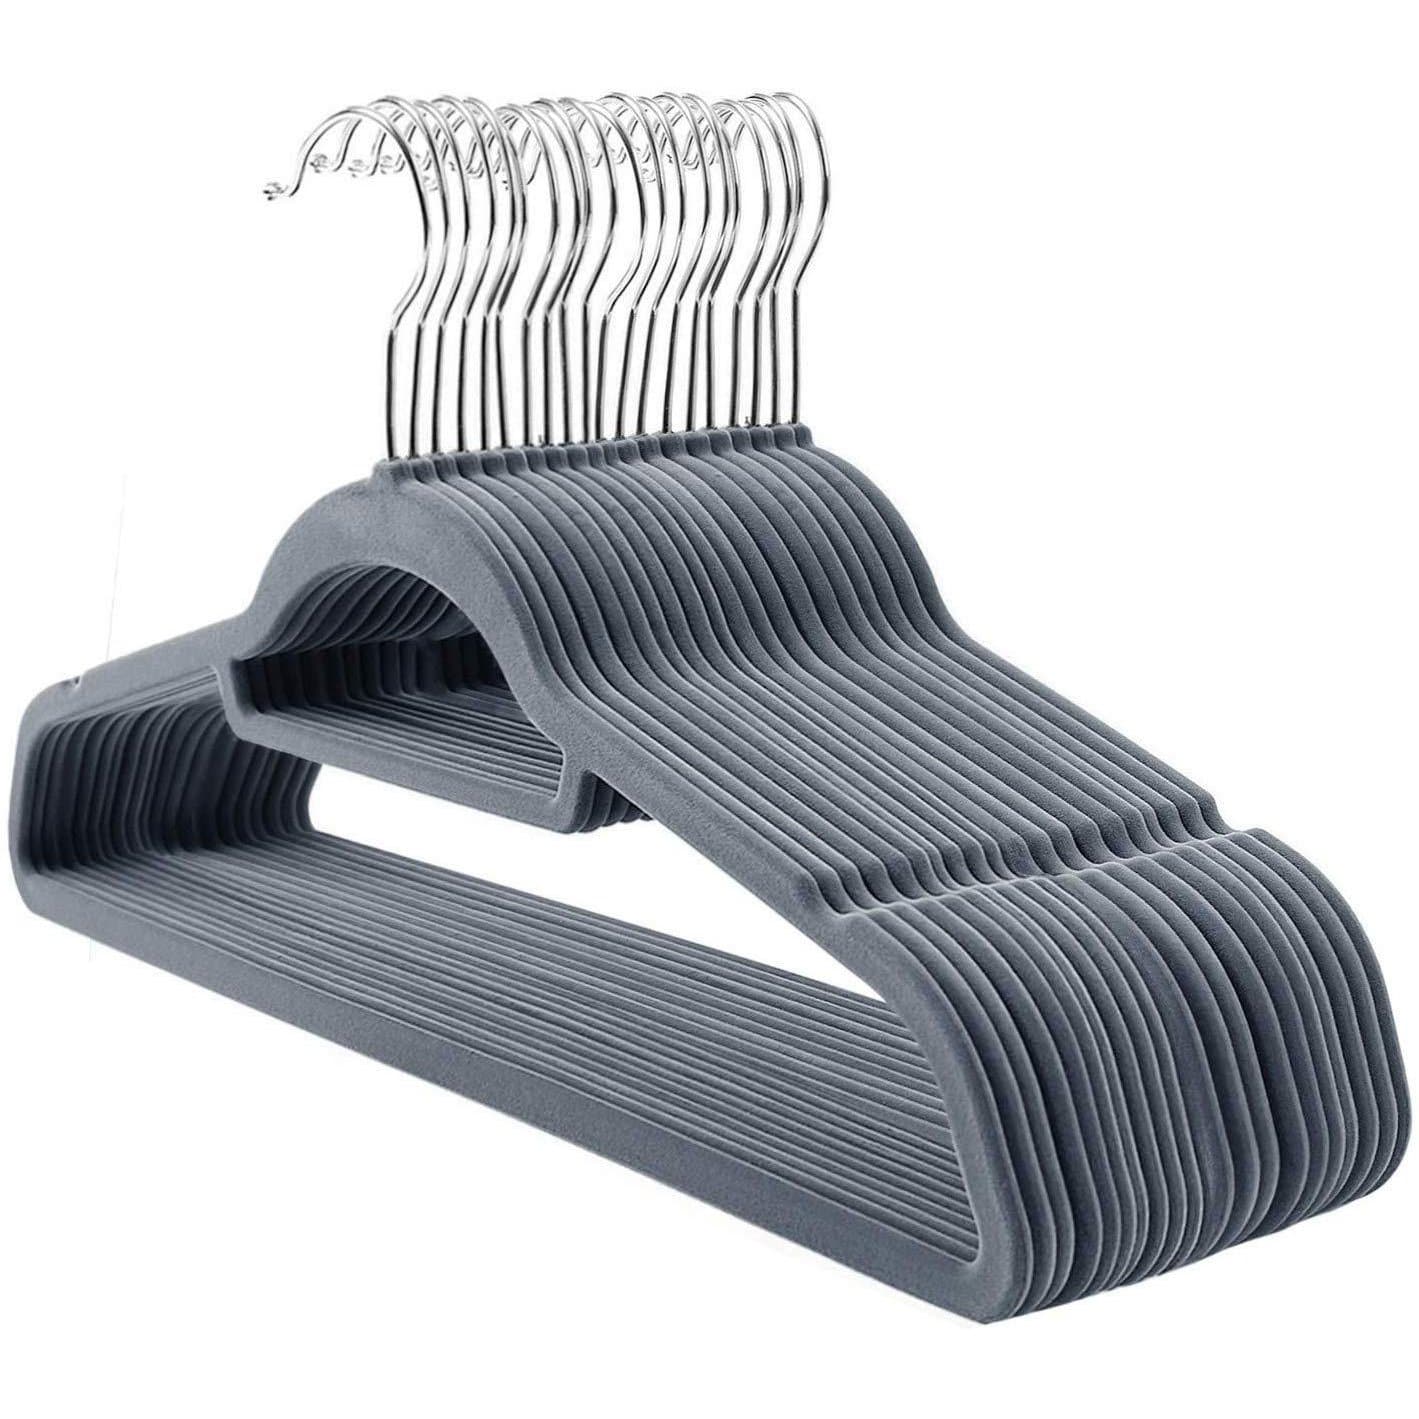 Nancy's - Space Saving Non-Slip Clothes Hangers - 20 Pieces - Ultra Thin Clothes Hangers with 360 degree swivel hook - Clothes hangers